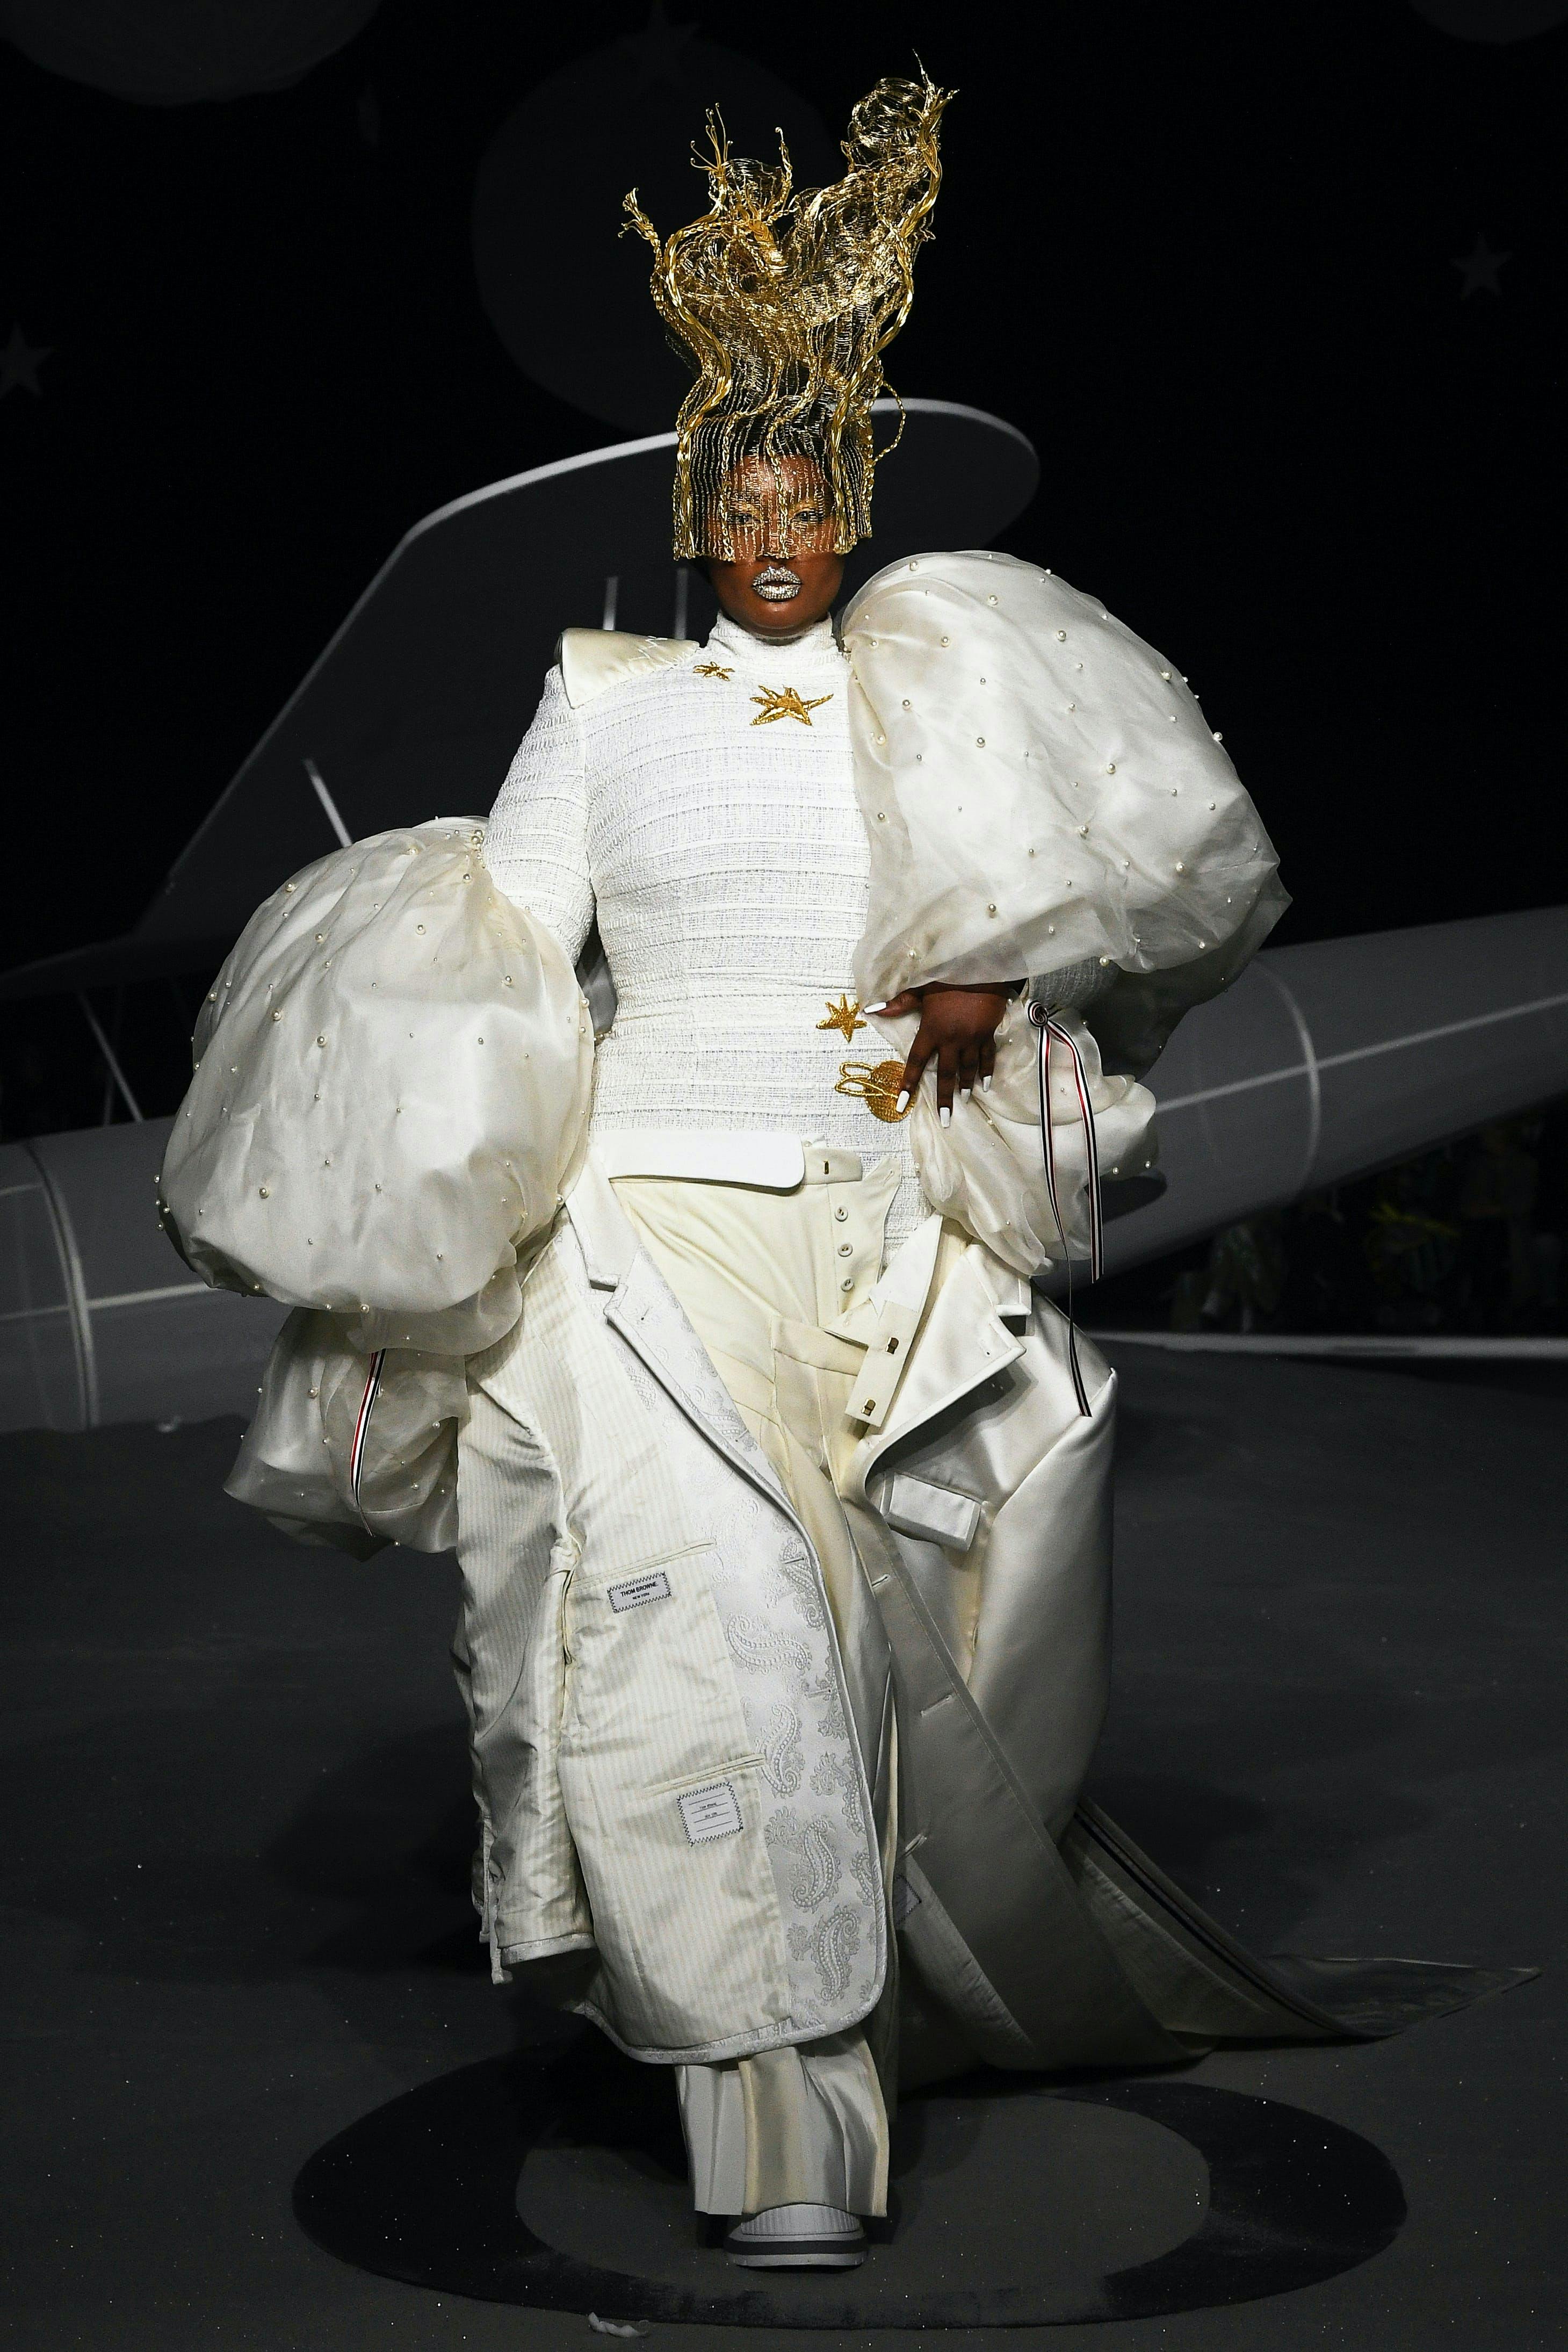 Thom Browne's Most Outrageous Runway Looks of All Time